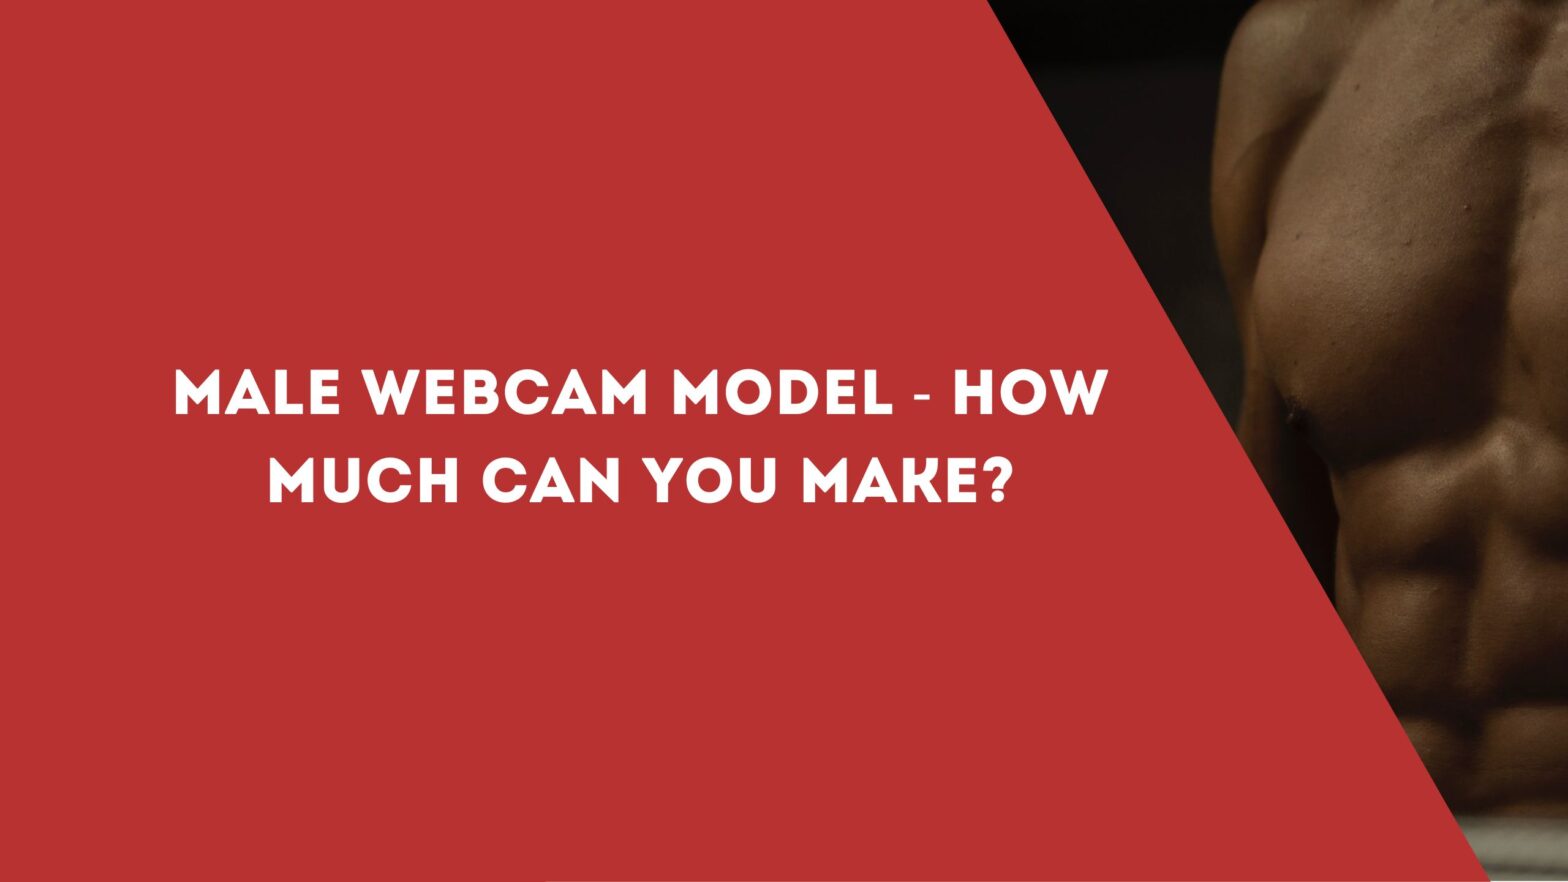 Male Webcam Model - How Much Can You Make?